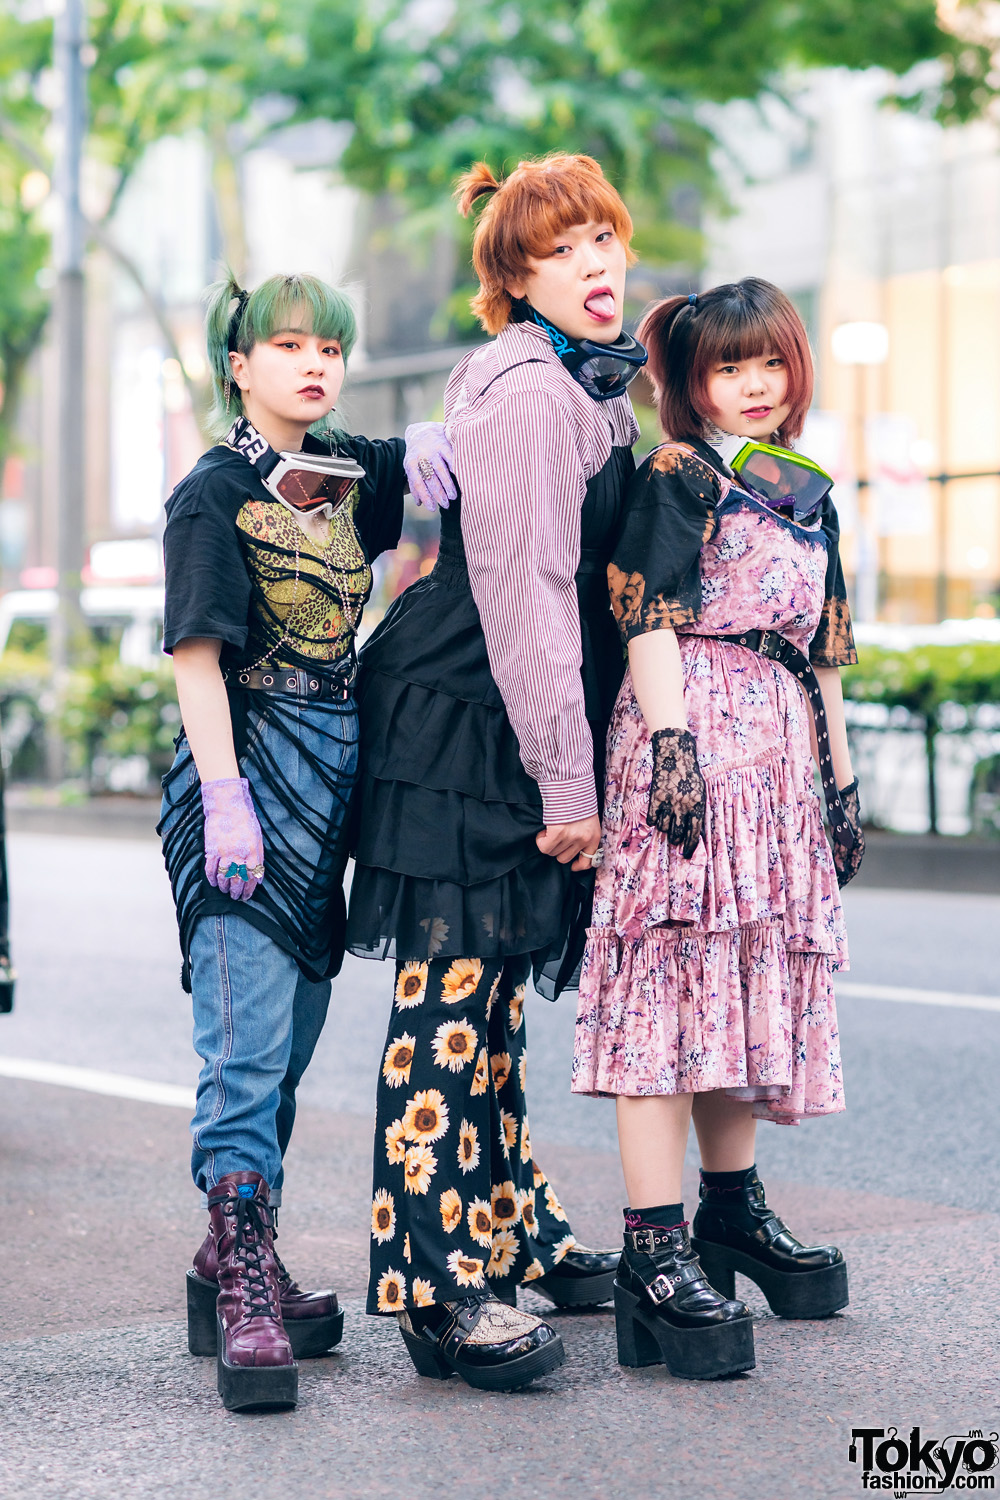 Harajuku Street Styles w/ Goggles, Lace Gloves, Remake & Vintage ...